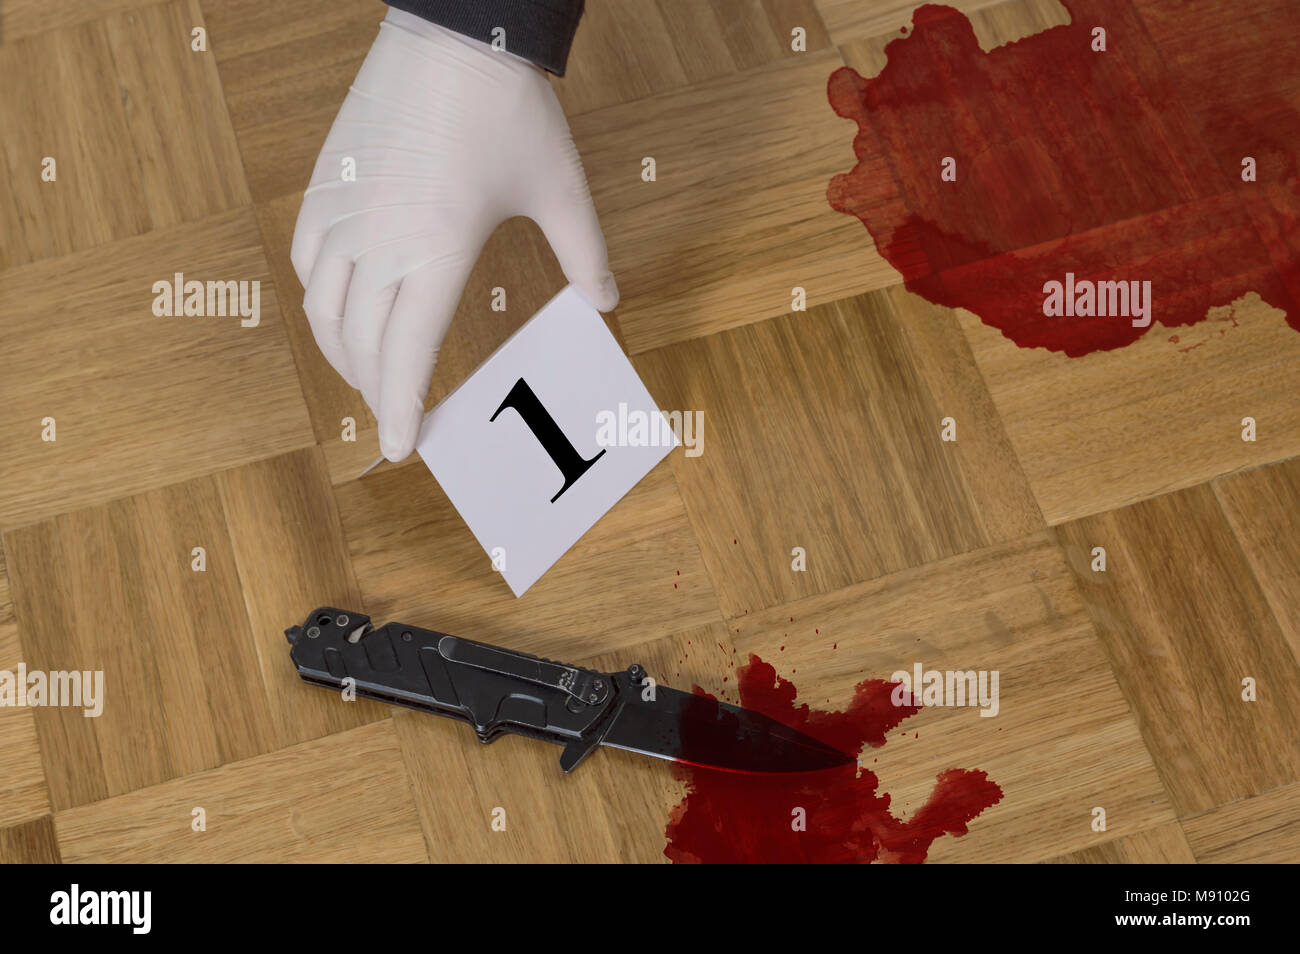 Crime scene investigation, evidence markers on wooden flor with knife and blood. Murder, kill and forensic evidence concept Stock Photo